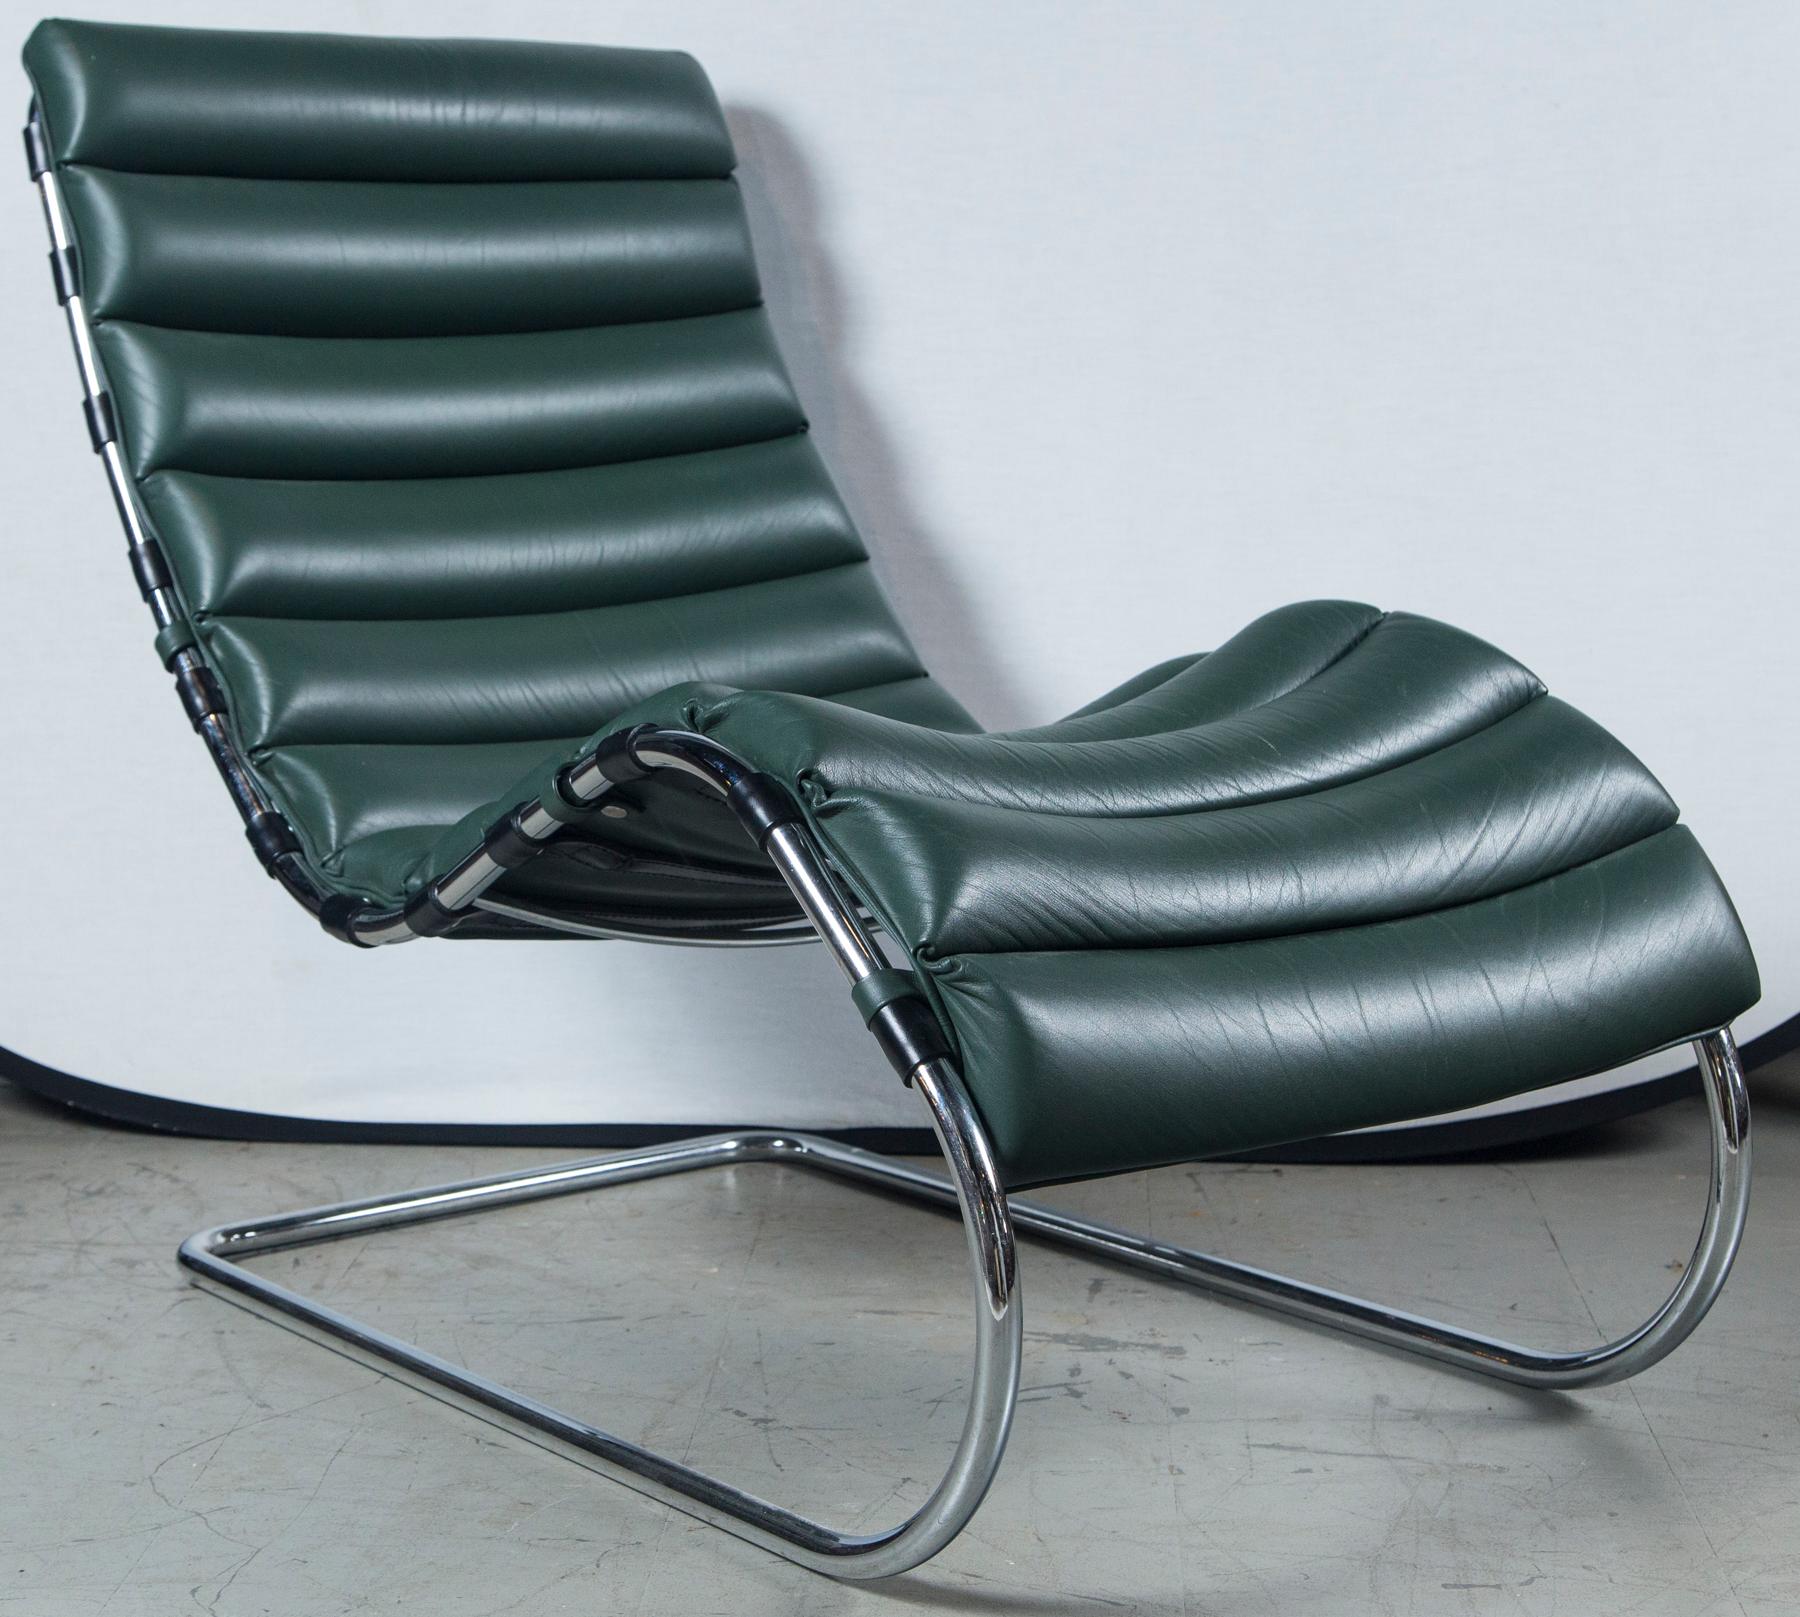 Vintage Italian Designer Leather Lounger In Excellent Condition For Sale In Stamford, CT